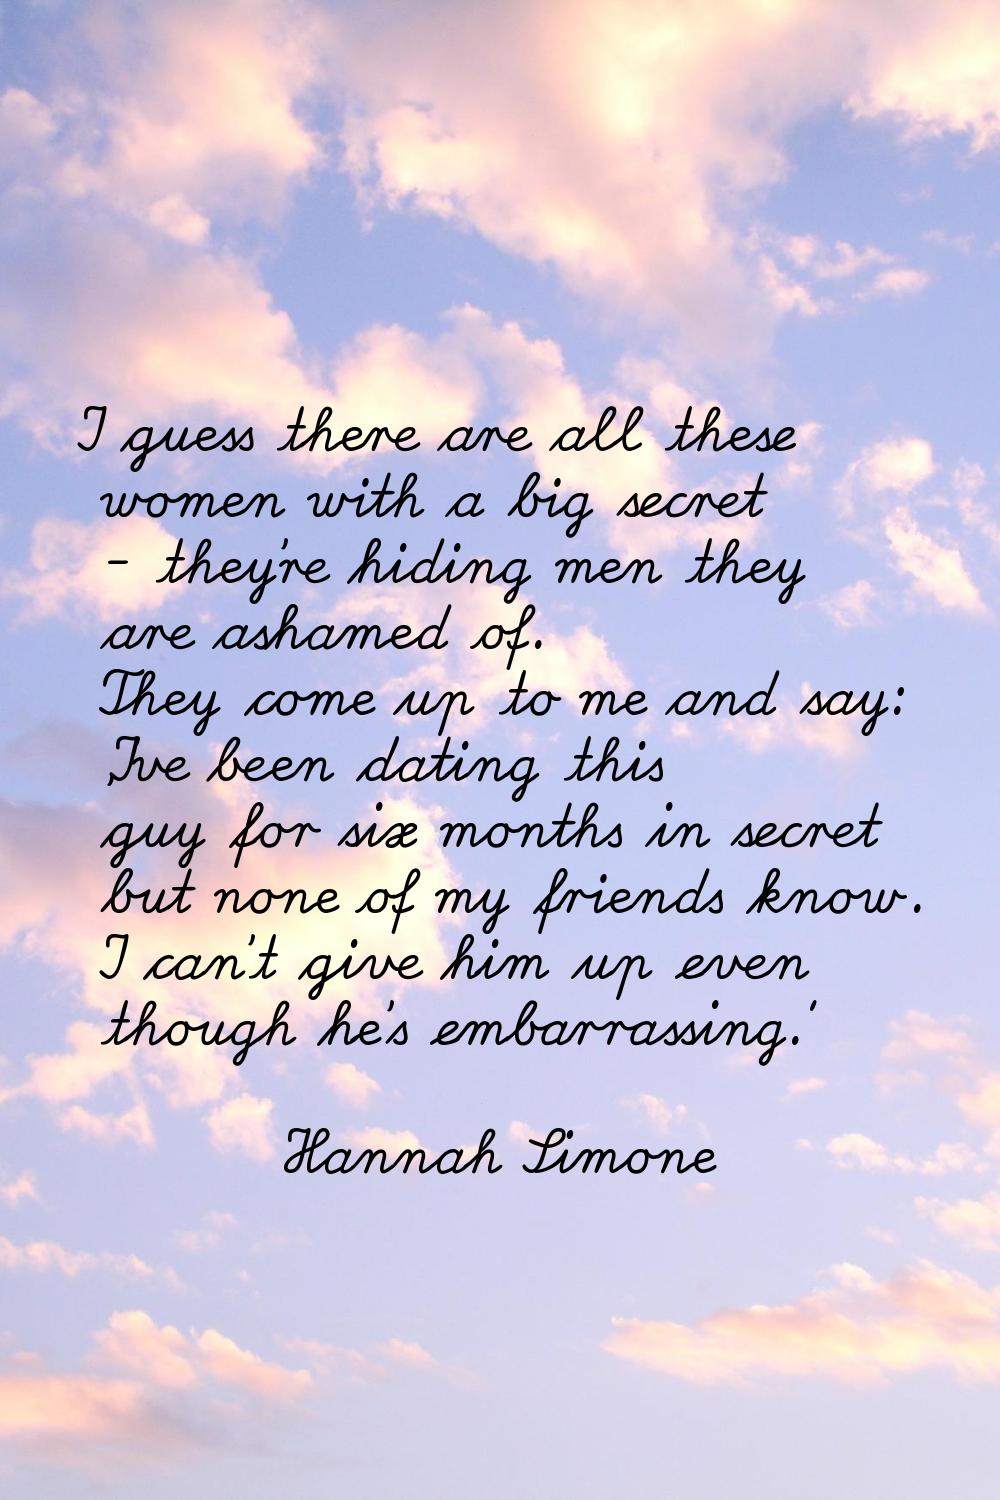 I guess there are all these women with a big secret - they're hiding men they are ashamed of. They 